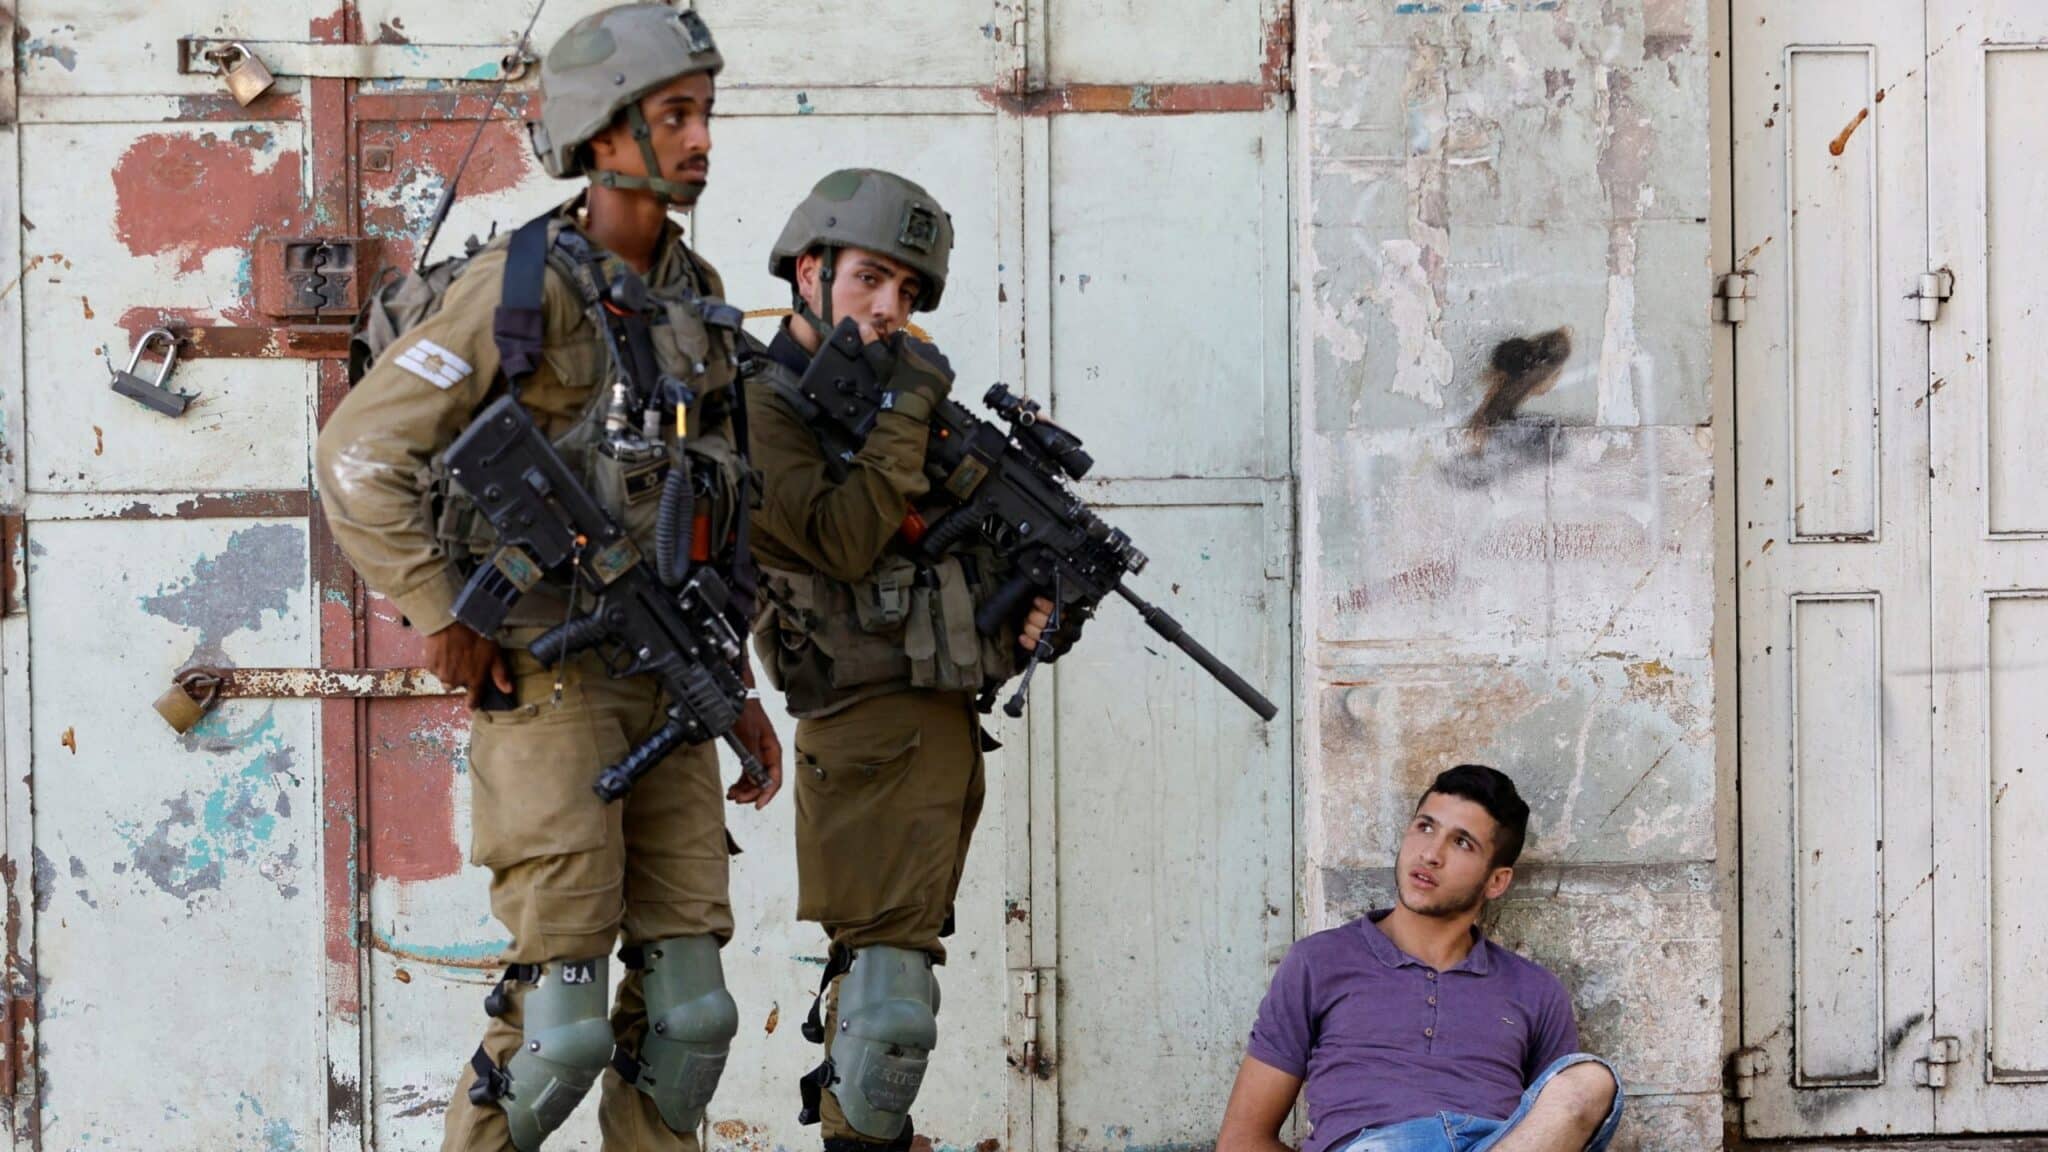 Israeli army soldiers detaining a Palestinian youth in Hebron on August 26, 2022. Photo: Reuters.